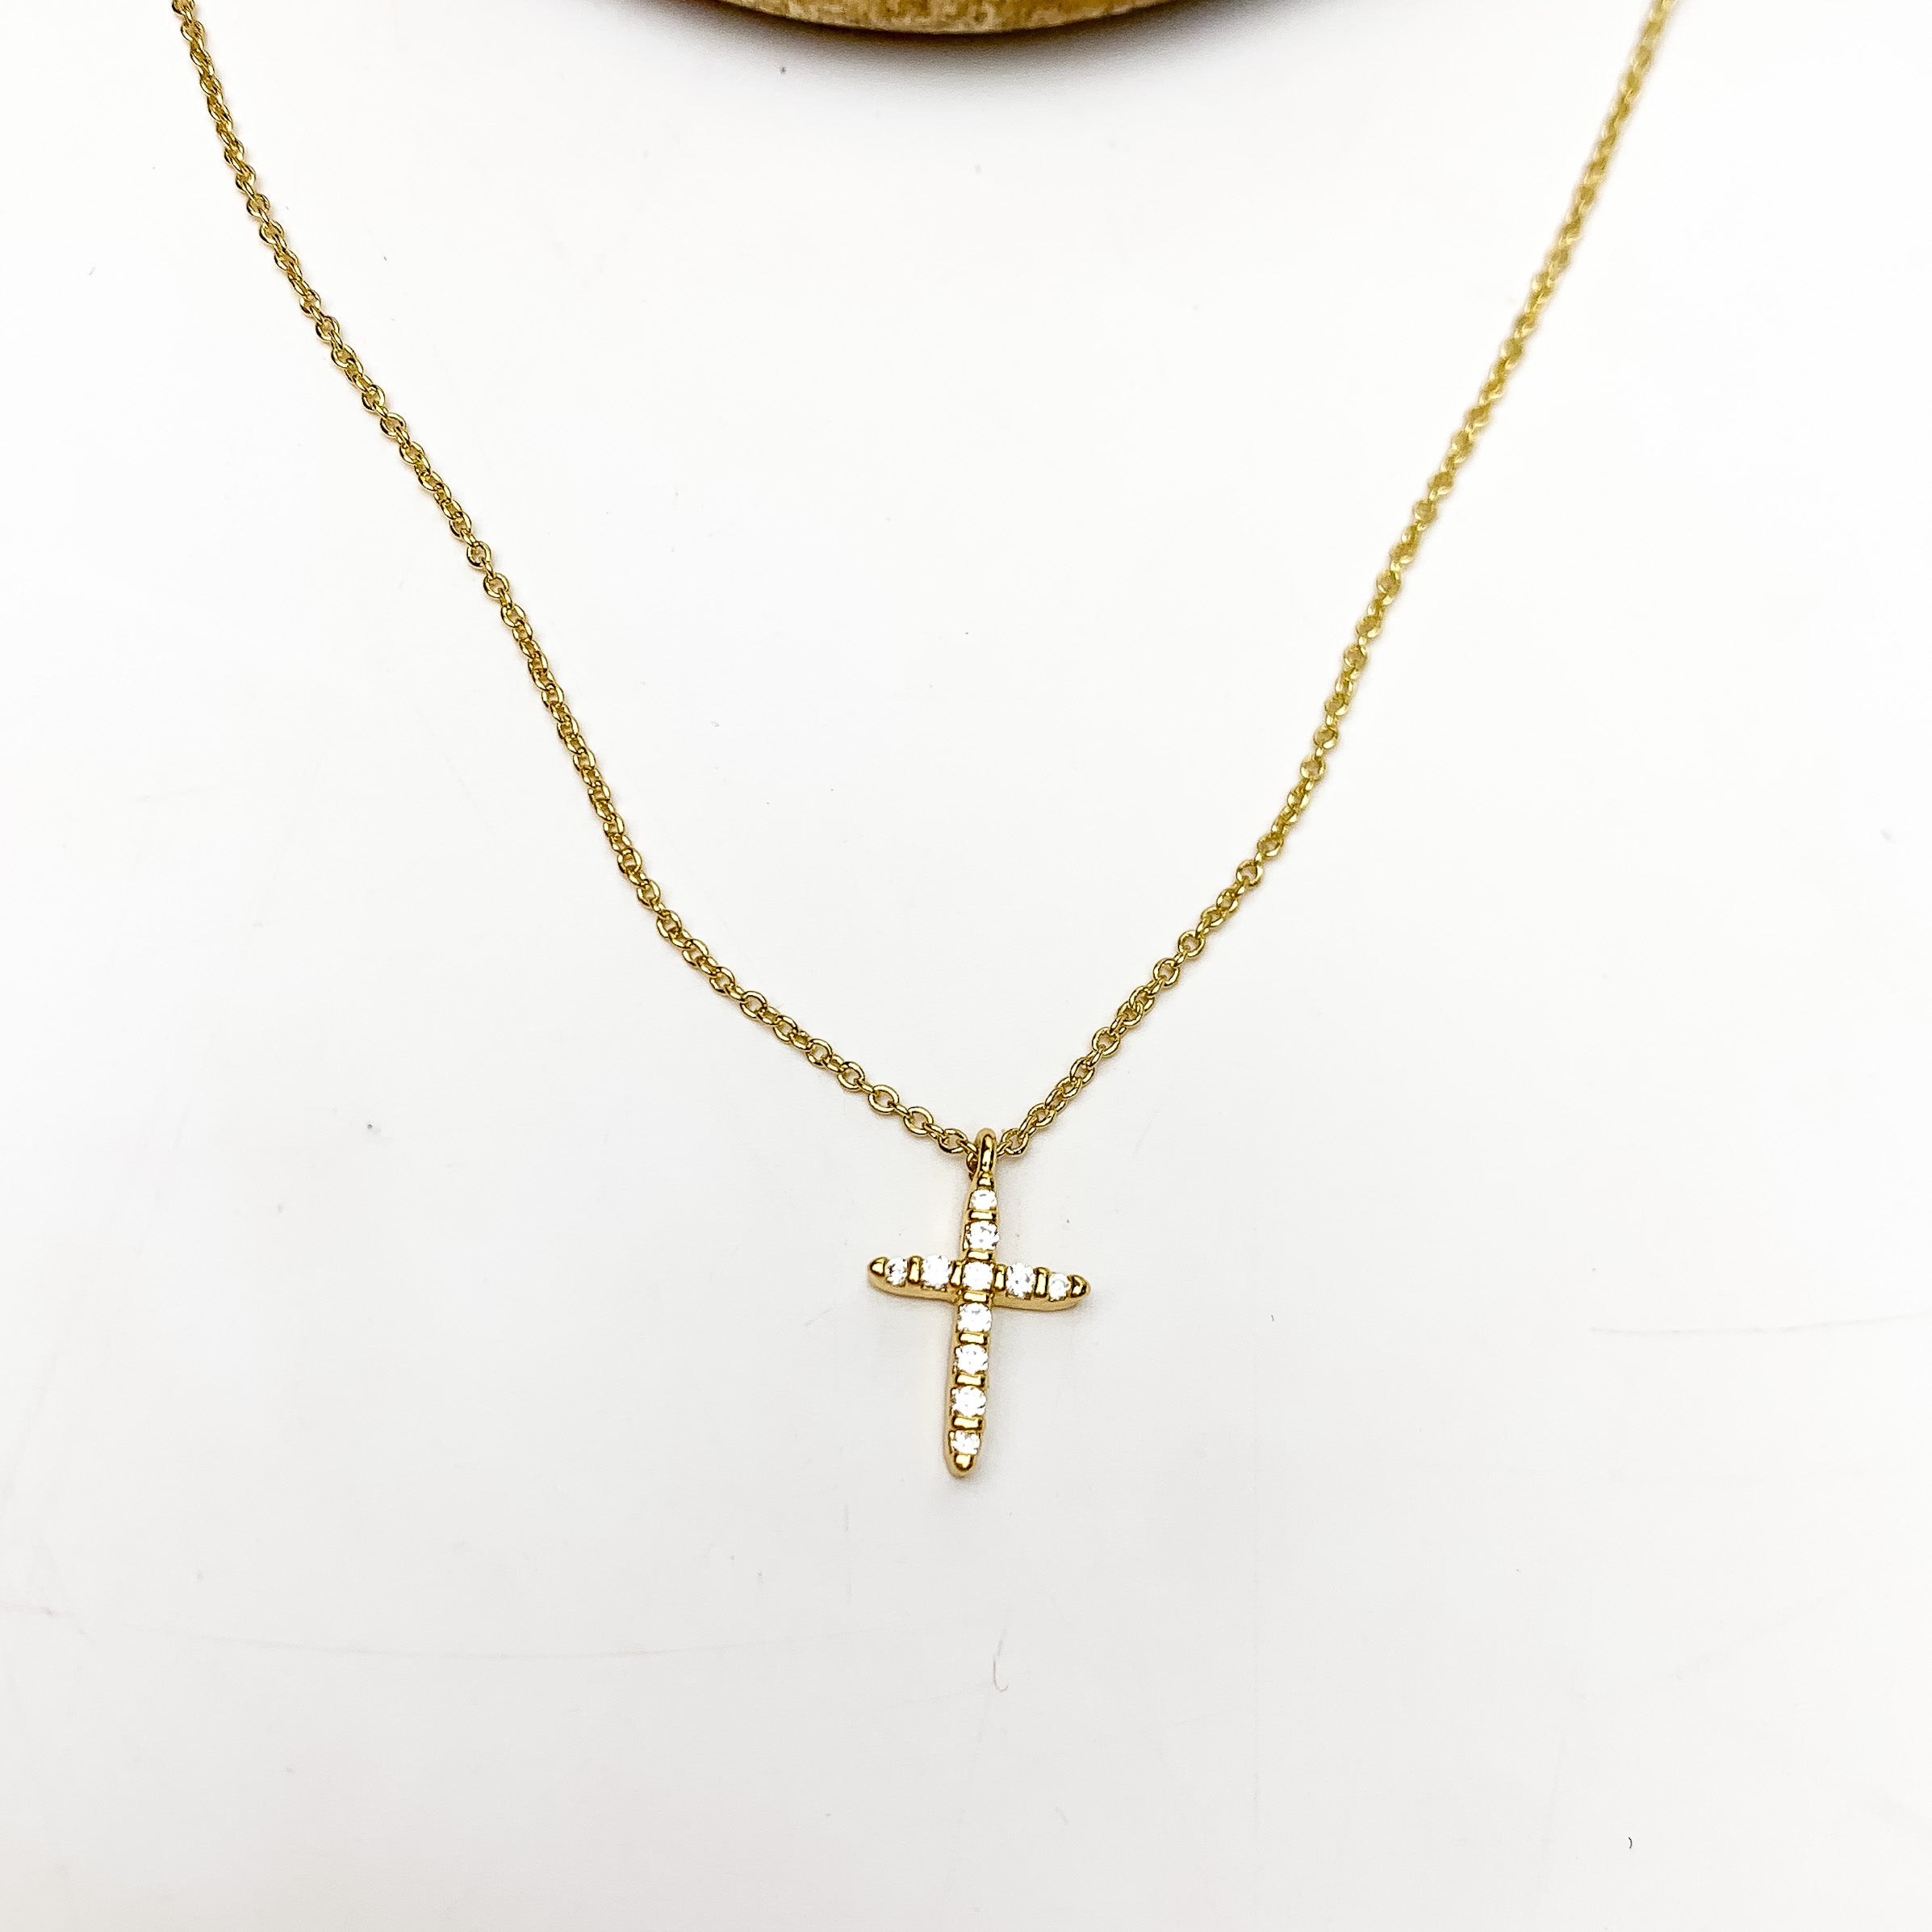 Gold Tone Glory Chain Necklace With Clear Crystal Cross - Giddy Up Glamour Boutique